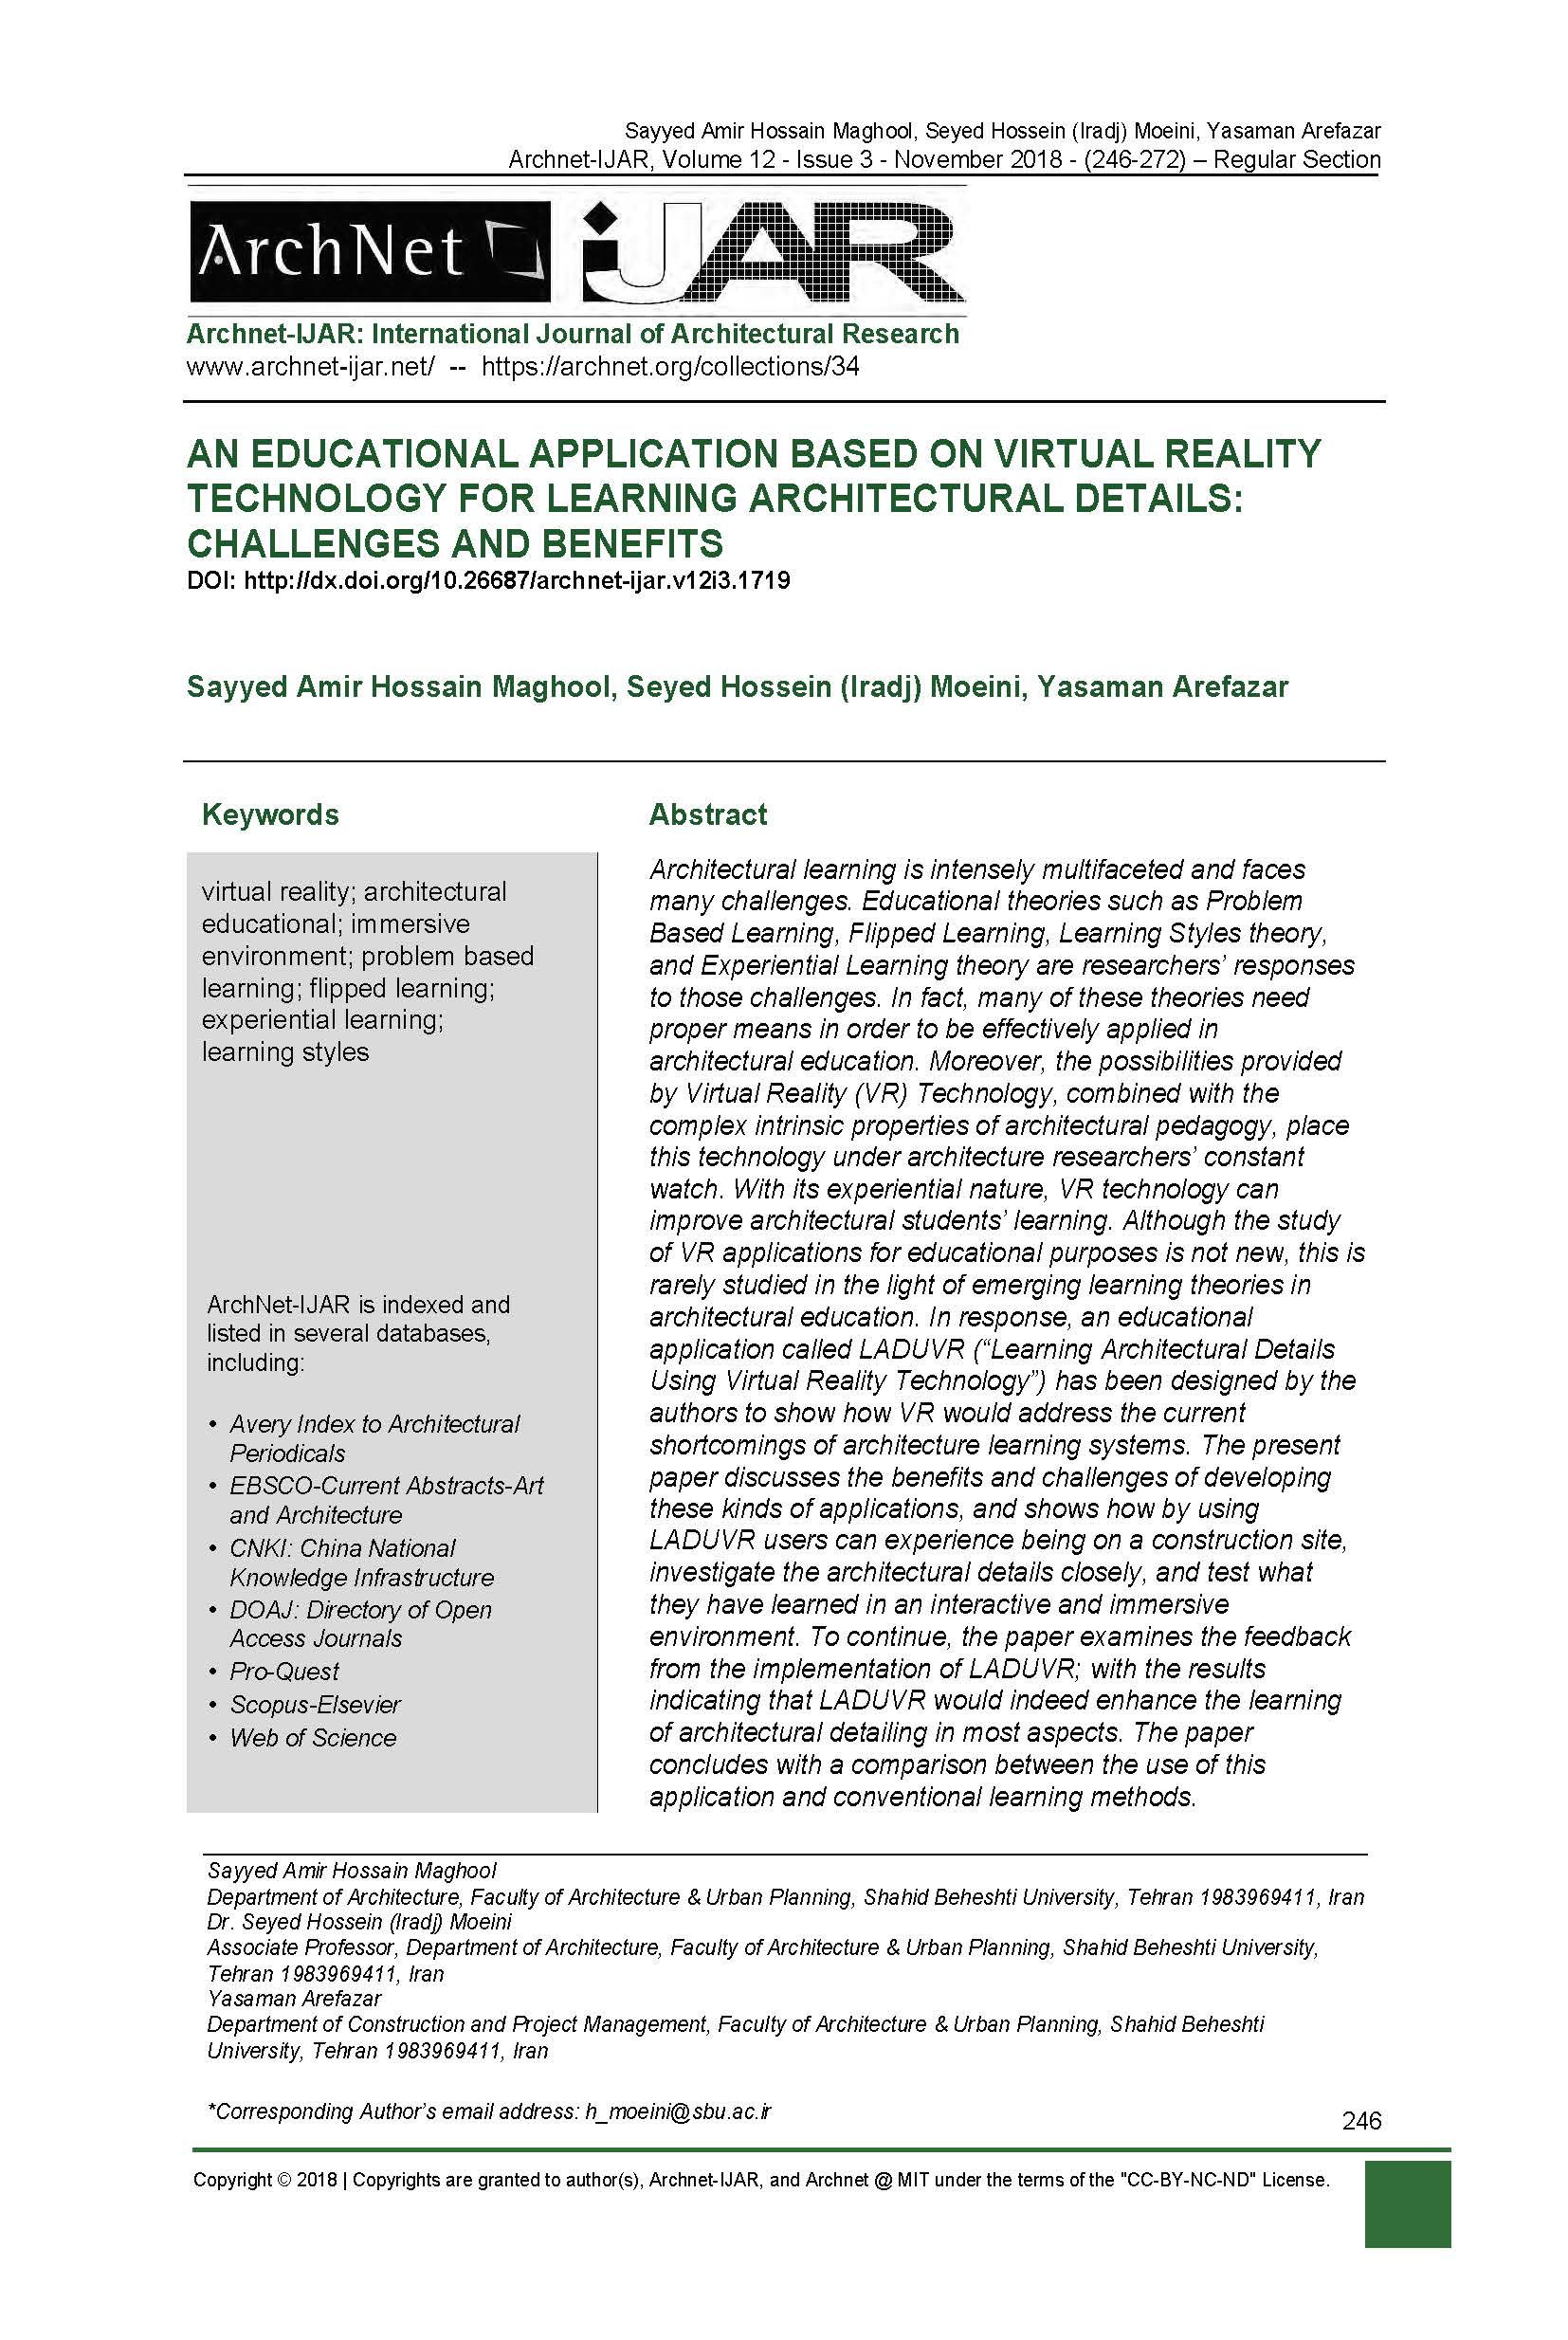 An Educational Application Based on Virtual Reality Technology for Learning Architectural Details: Challenges and Benefits